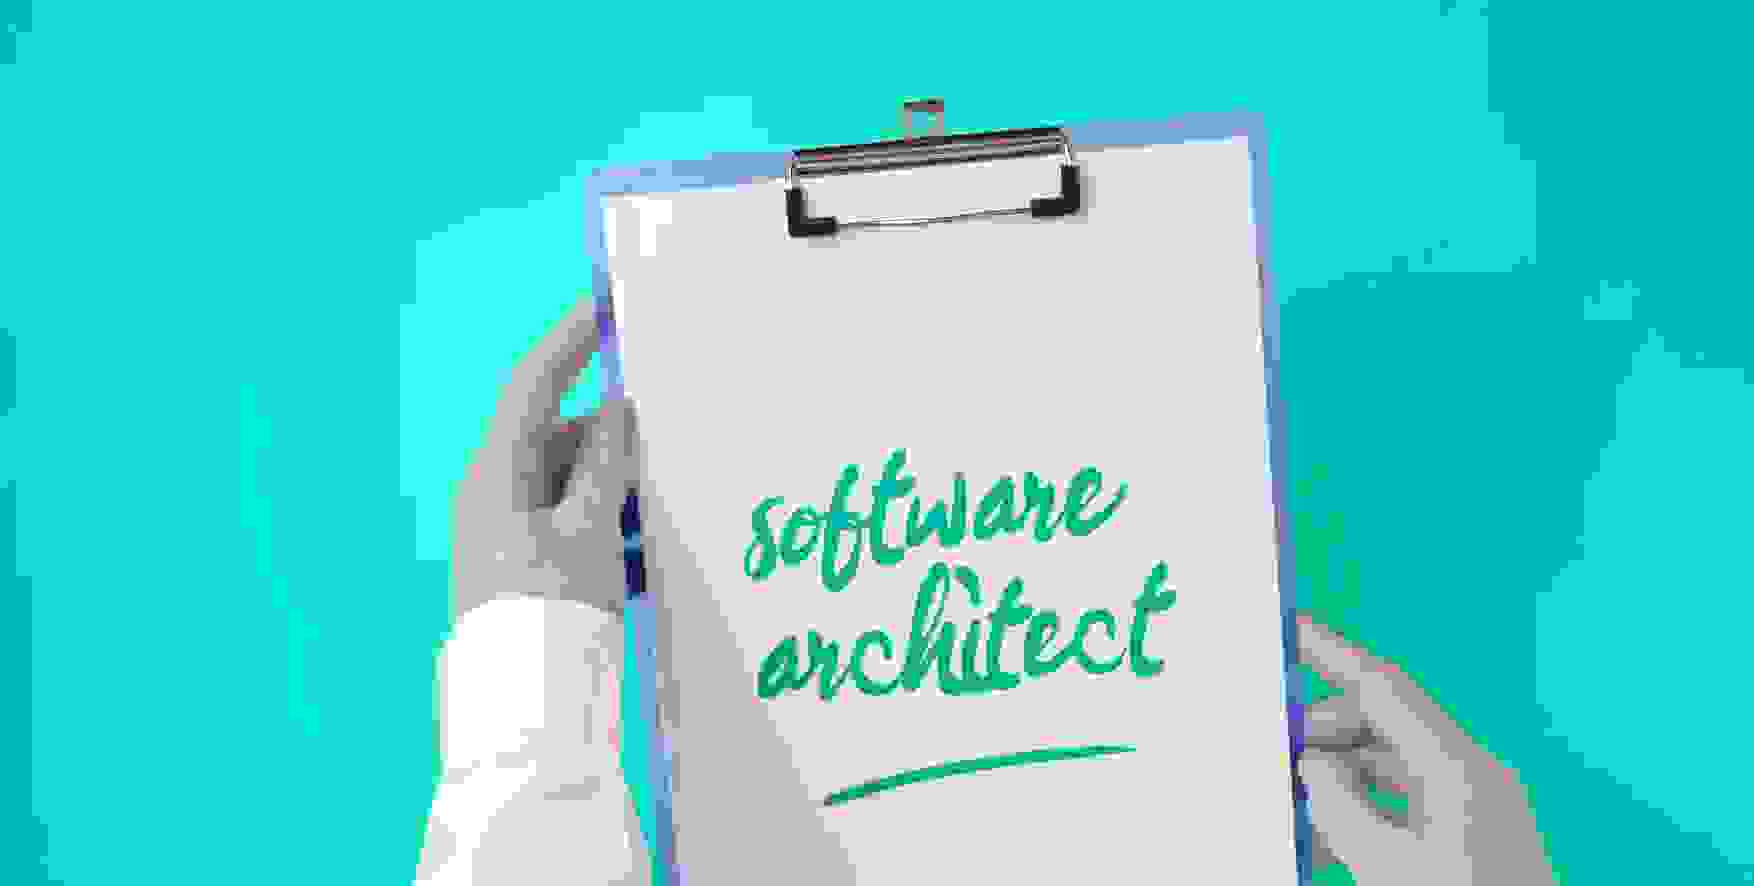 software architect written on a piece of paper in a clipboard